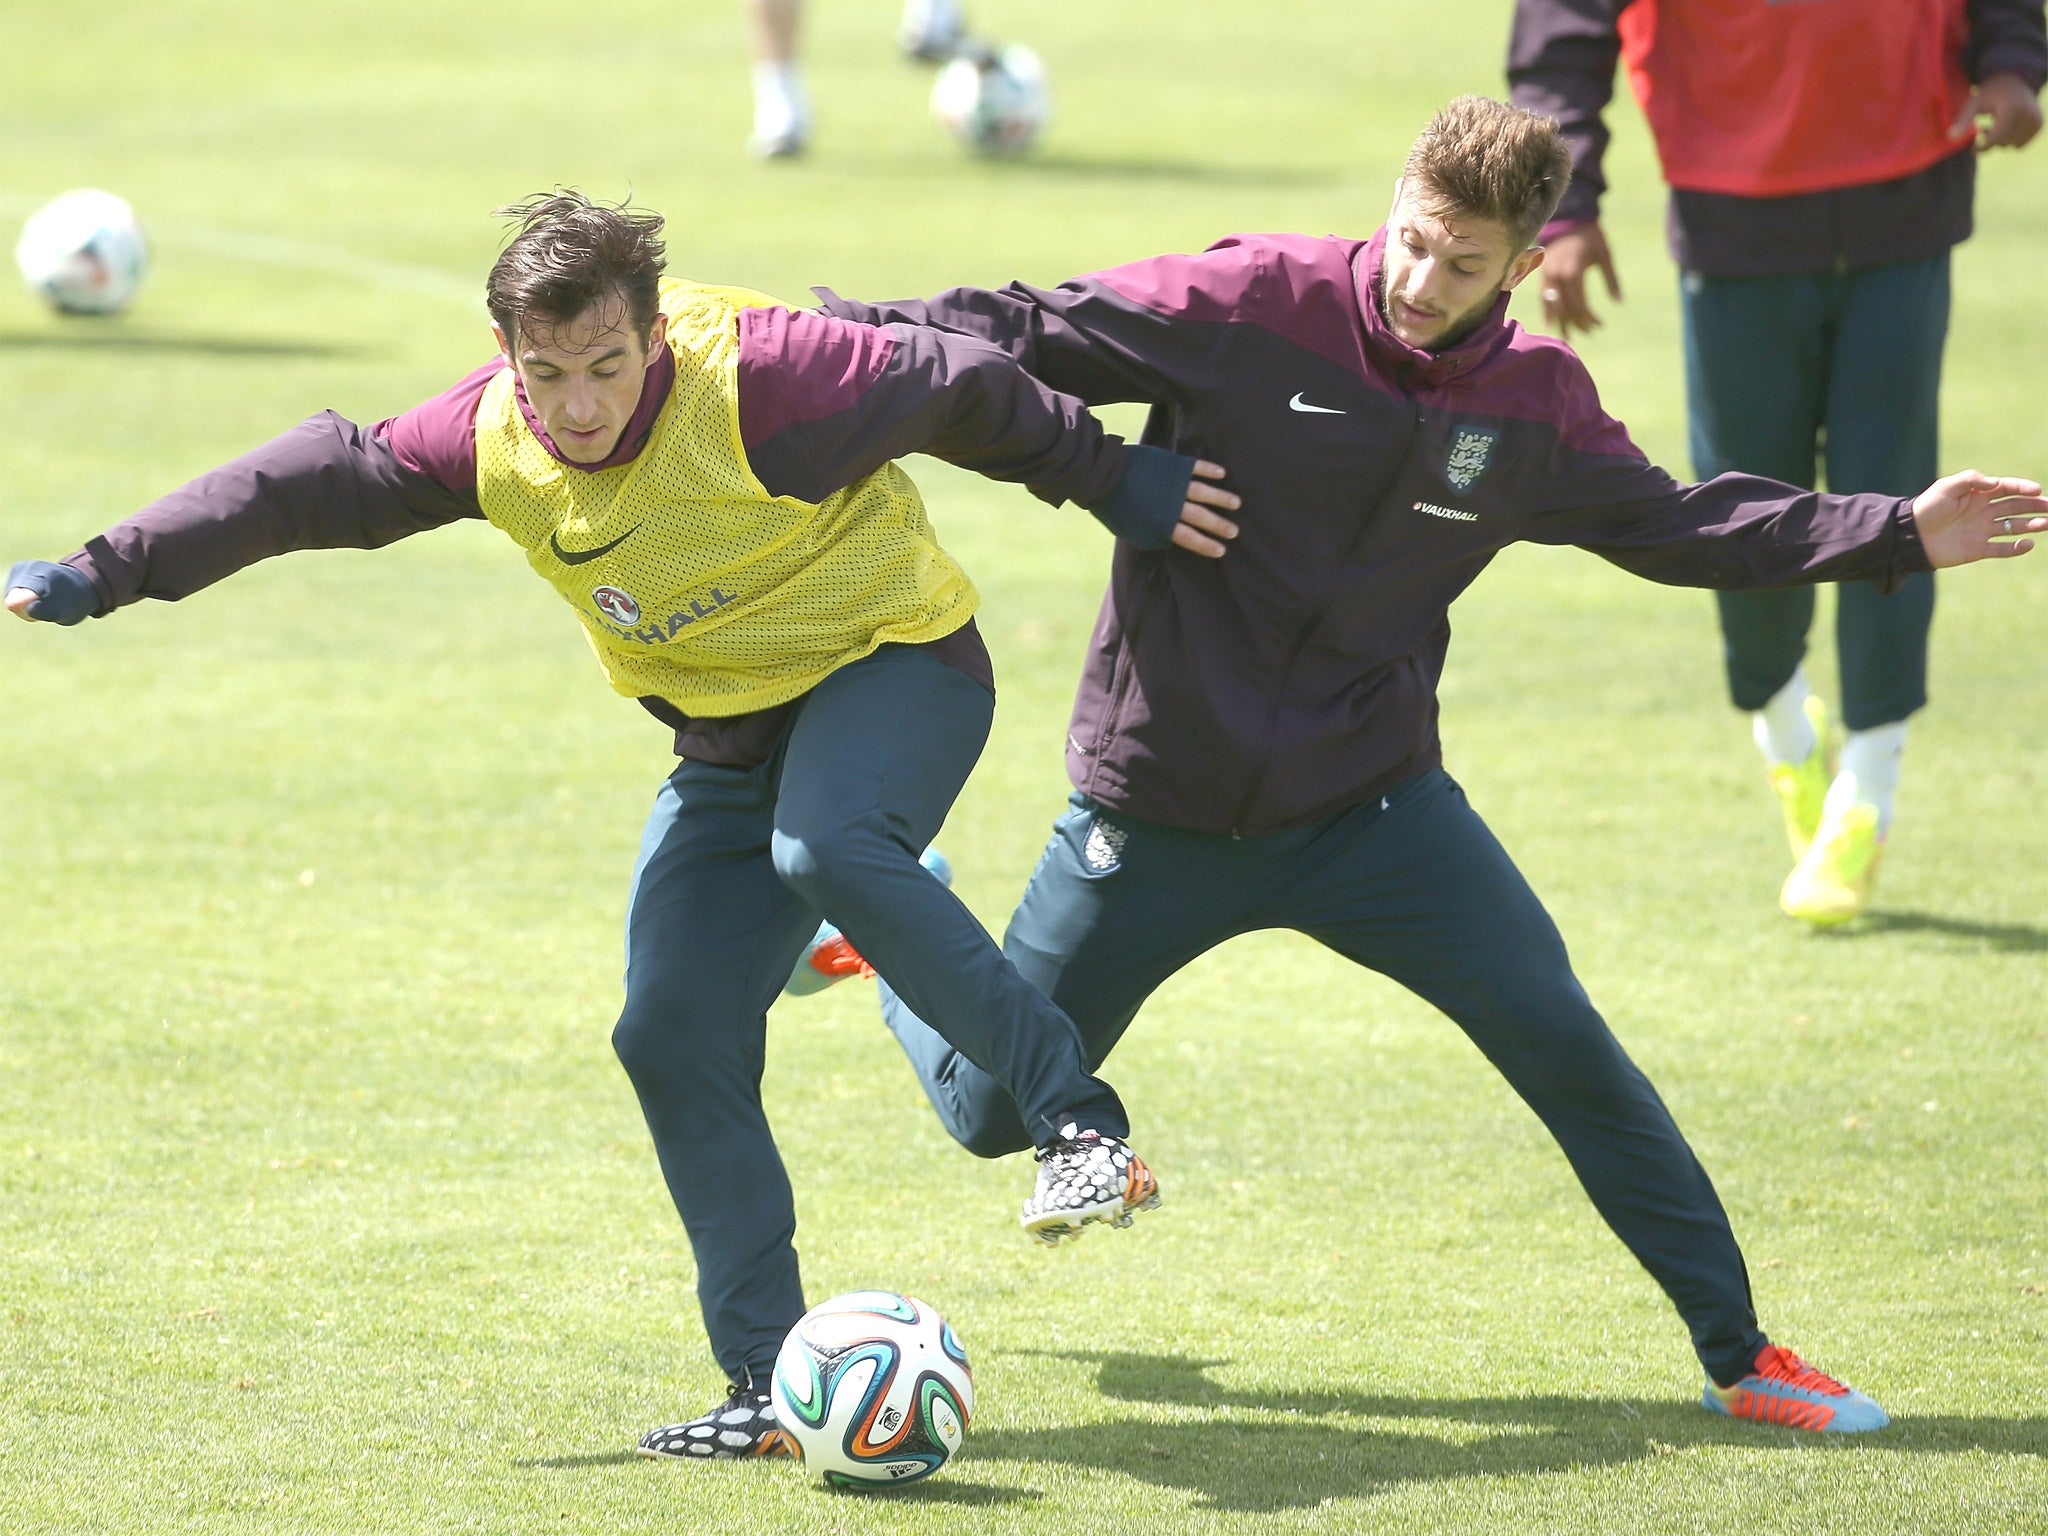 Leighton Baines and Adam Lallana tussle for the ball during training at the Vale Do Lobo Resort